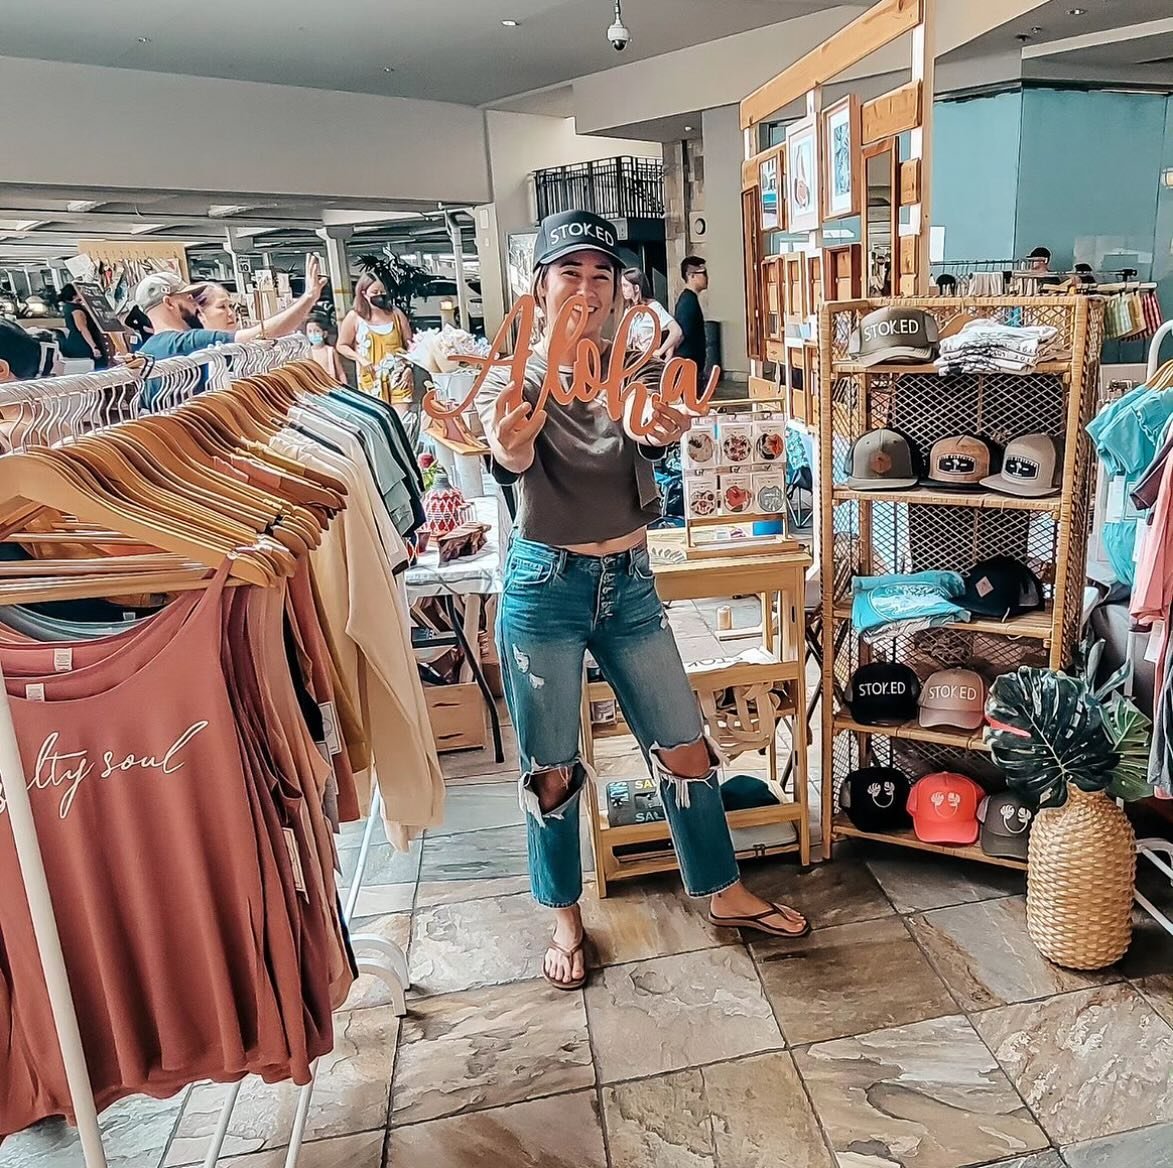 From coast to coast, @tiysclothing is all about sun, salt, sea, and sand ☀️🌊🏖️

✨Tomorrow✨ drop by our Ala Moana Center Market and check out some of their vintage style embroidered tees, sweatshirts, and hats! They&rsquo;ve got that ultra soft and 